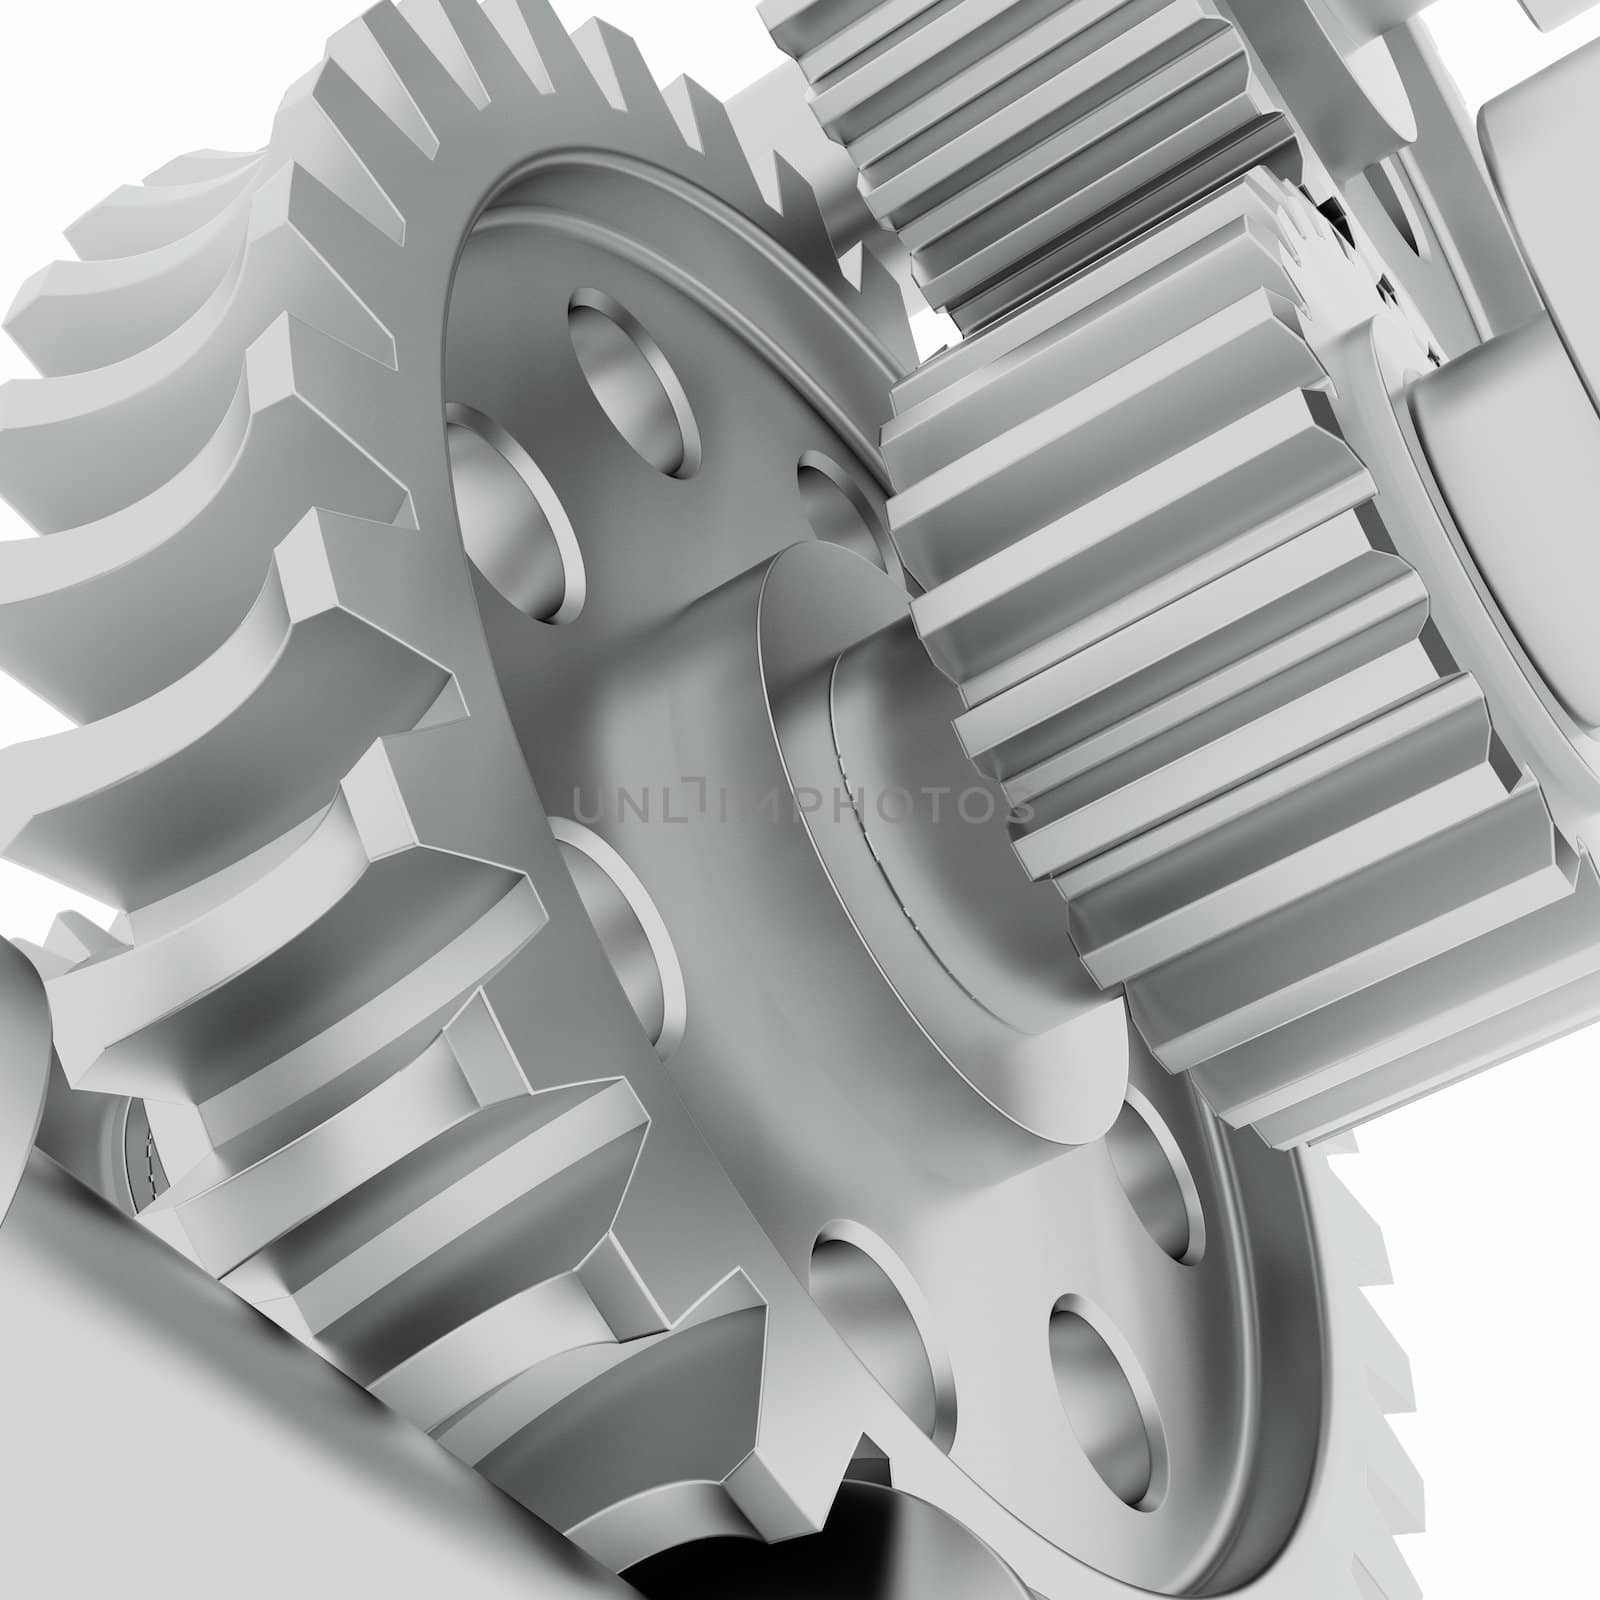 Metal shafts, gears and bearings. 3d render on white background